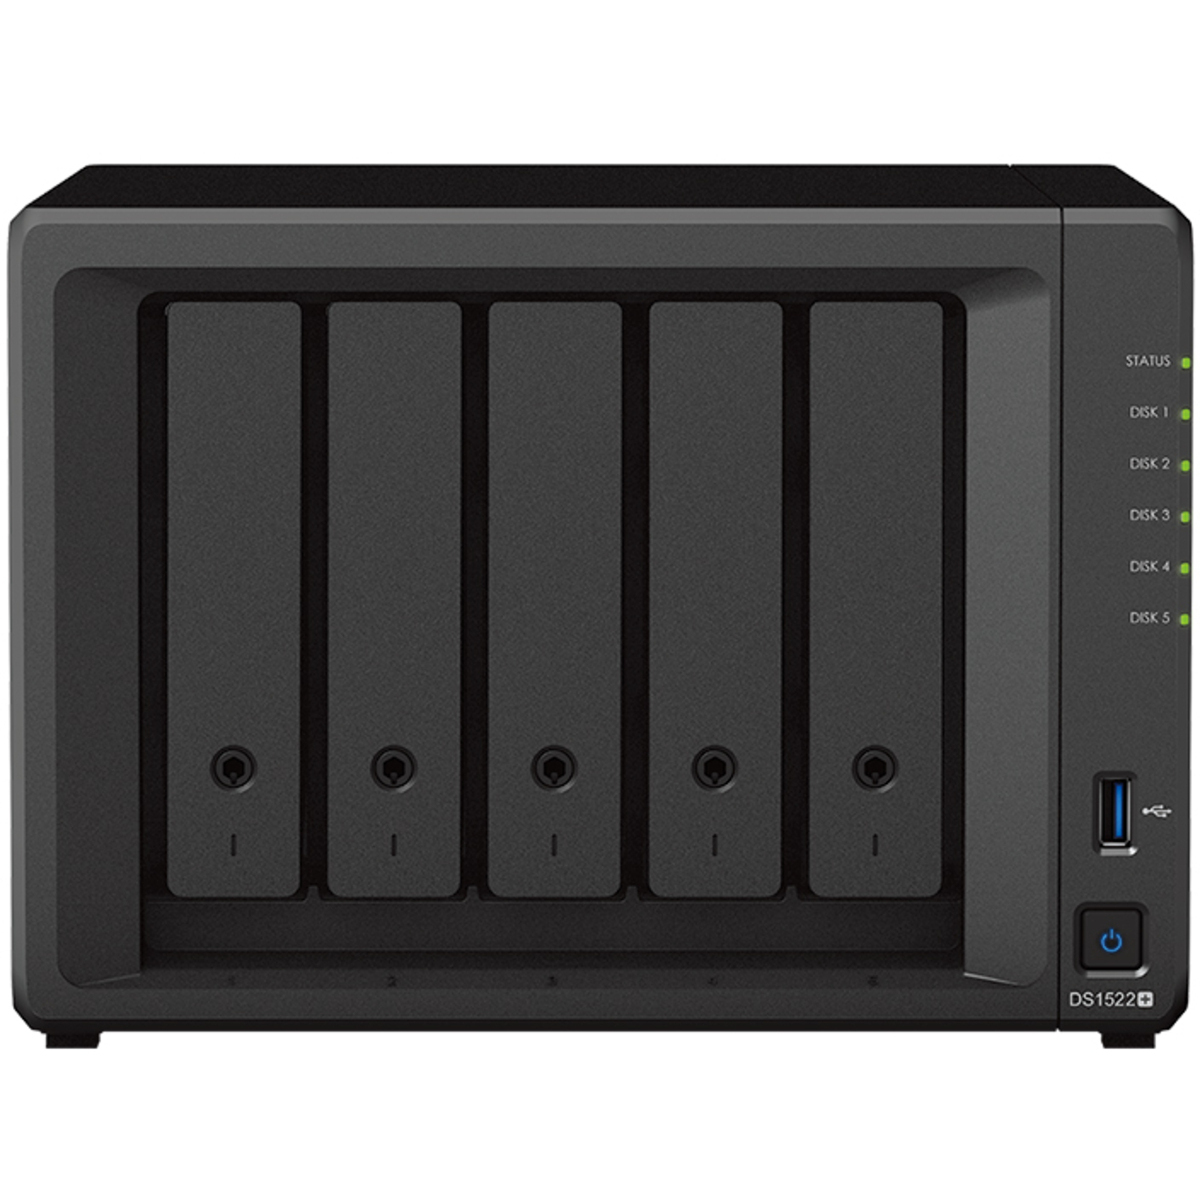 Synology DiskStation DS1522+ 90tb 5-Bay Desktop Multimedia / Power User / Business NAS - Network Attached Storage Device 5x18tb Western Digital Red Pro WD181KFGX 3.5 7200rpm SATA 6Gb/s HDD NAS Class Drives Installed - Burn-In Tested - ON SALE DiskStation DS1522+